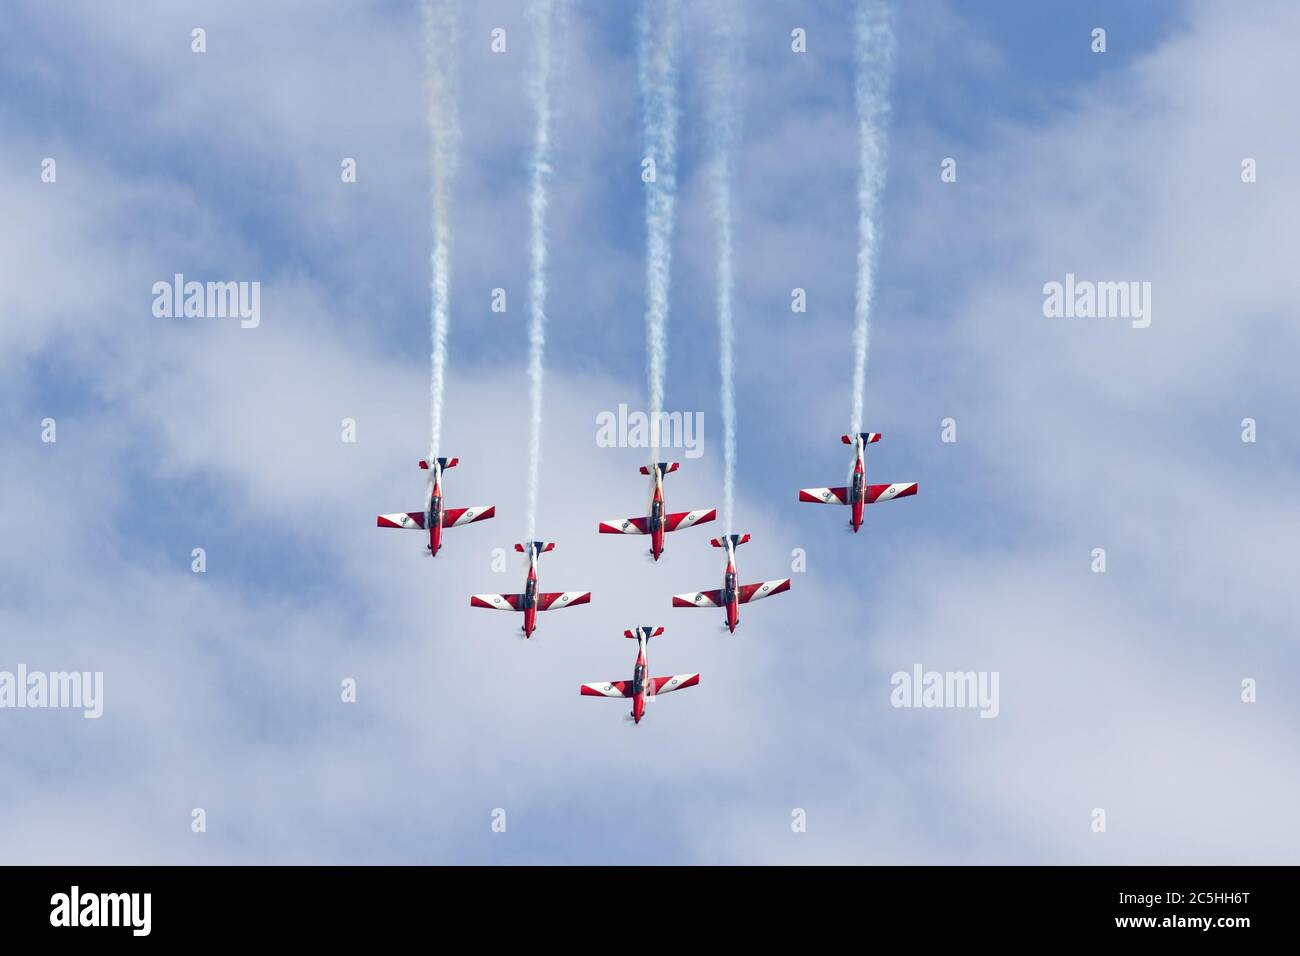 Royal Australian Air Force (RAAF) Roulettes formation aerobatic display team performing an aerial display in Pilatus PC-9A Trainer aircraft. Stock Photo